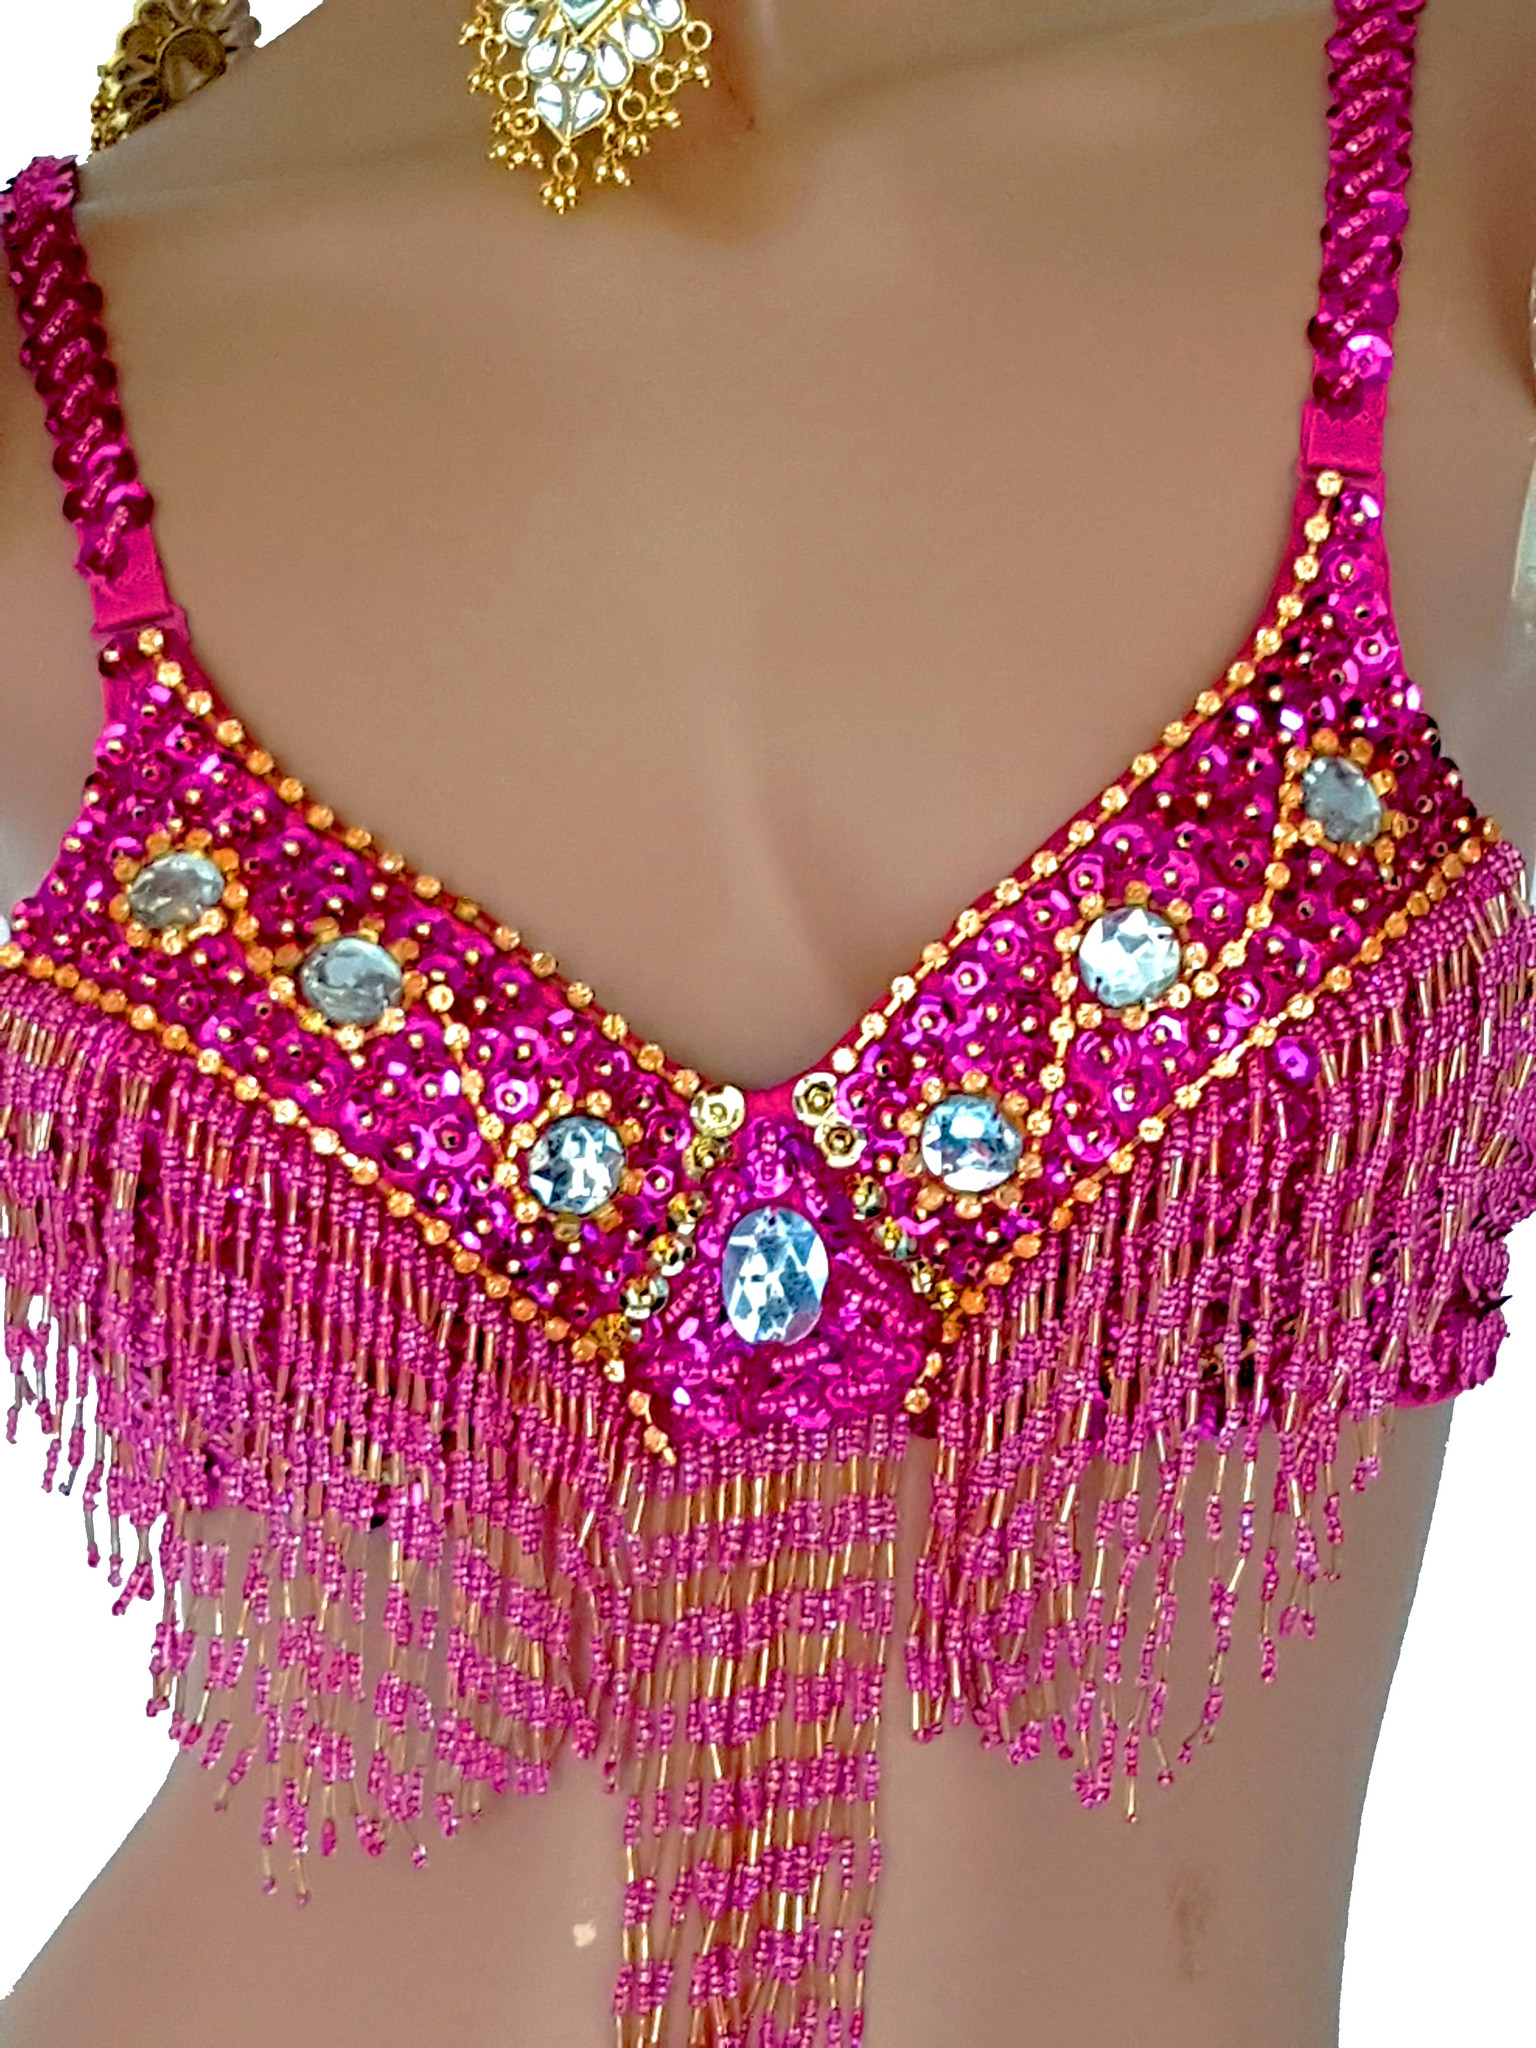 Fuchsia bra with silver and gold elements